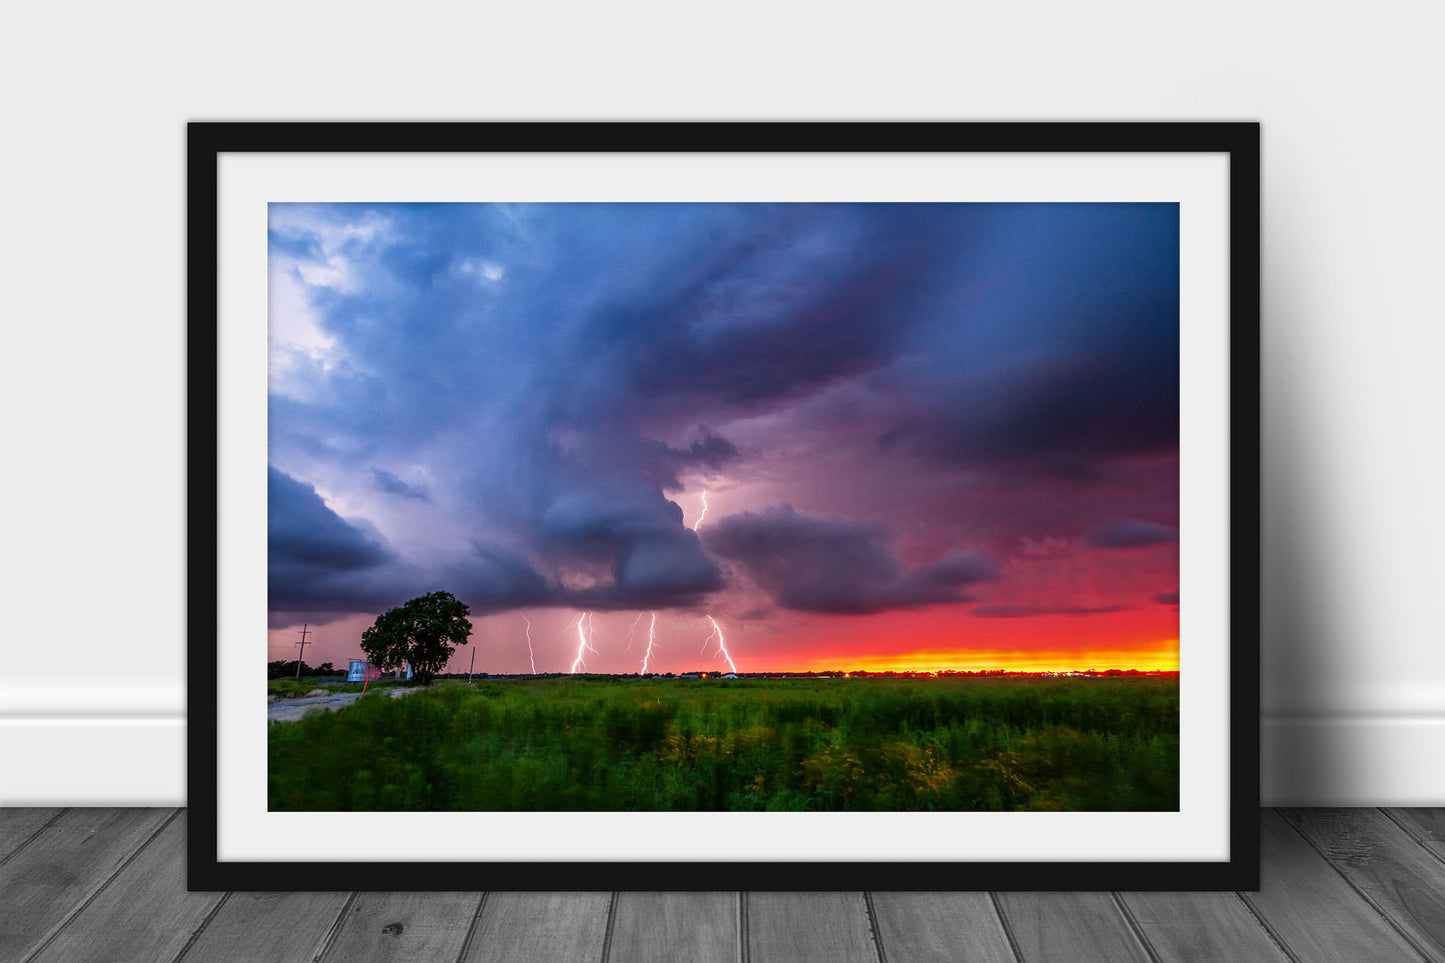 Framed and matted storm photography print of multiple lightning strikes at sunset on a stormy summer evening in Oklahoma by Sean Ramsey of Southern Plains Photography.